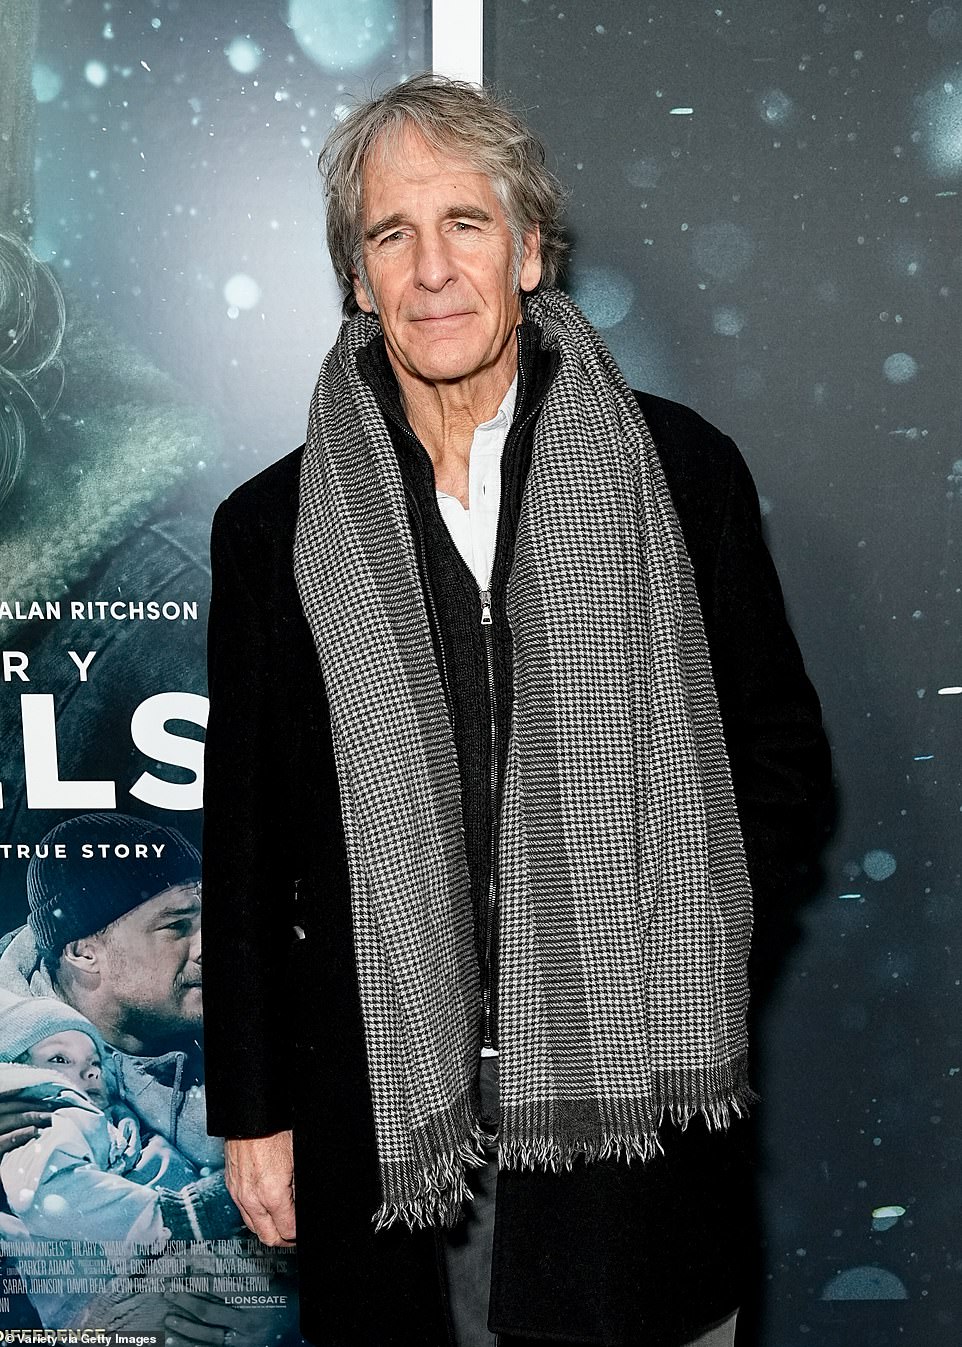 The iconic actor was very well dressed in a black coat over a white shirt and a large black and white checkered scarf for his moment on the red carpet.